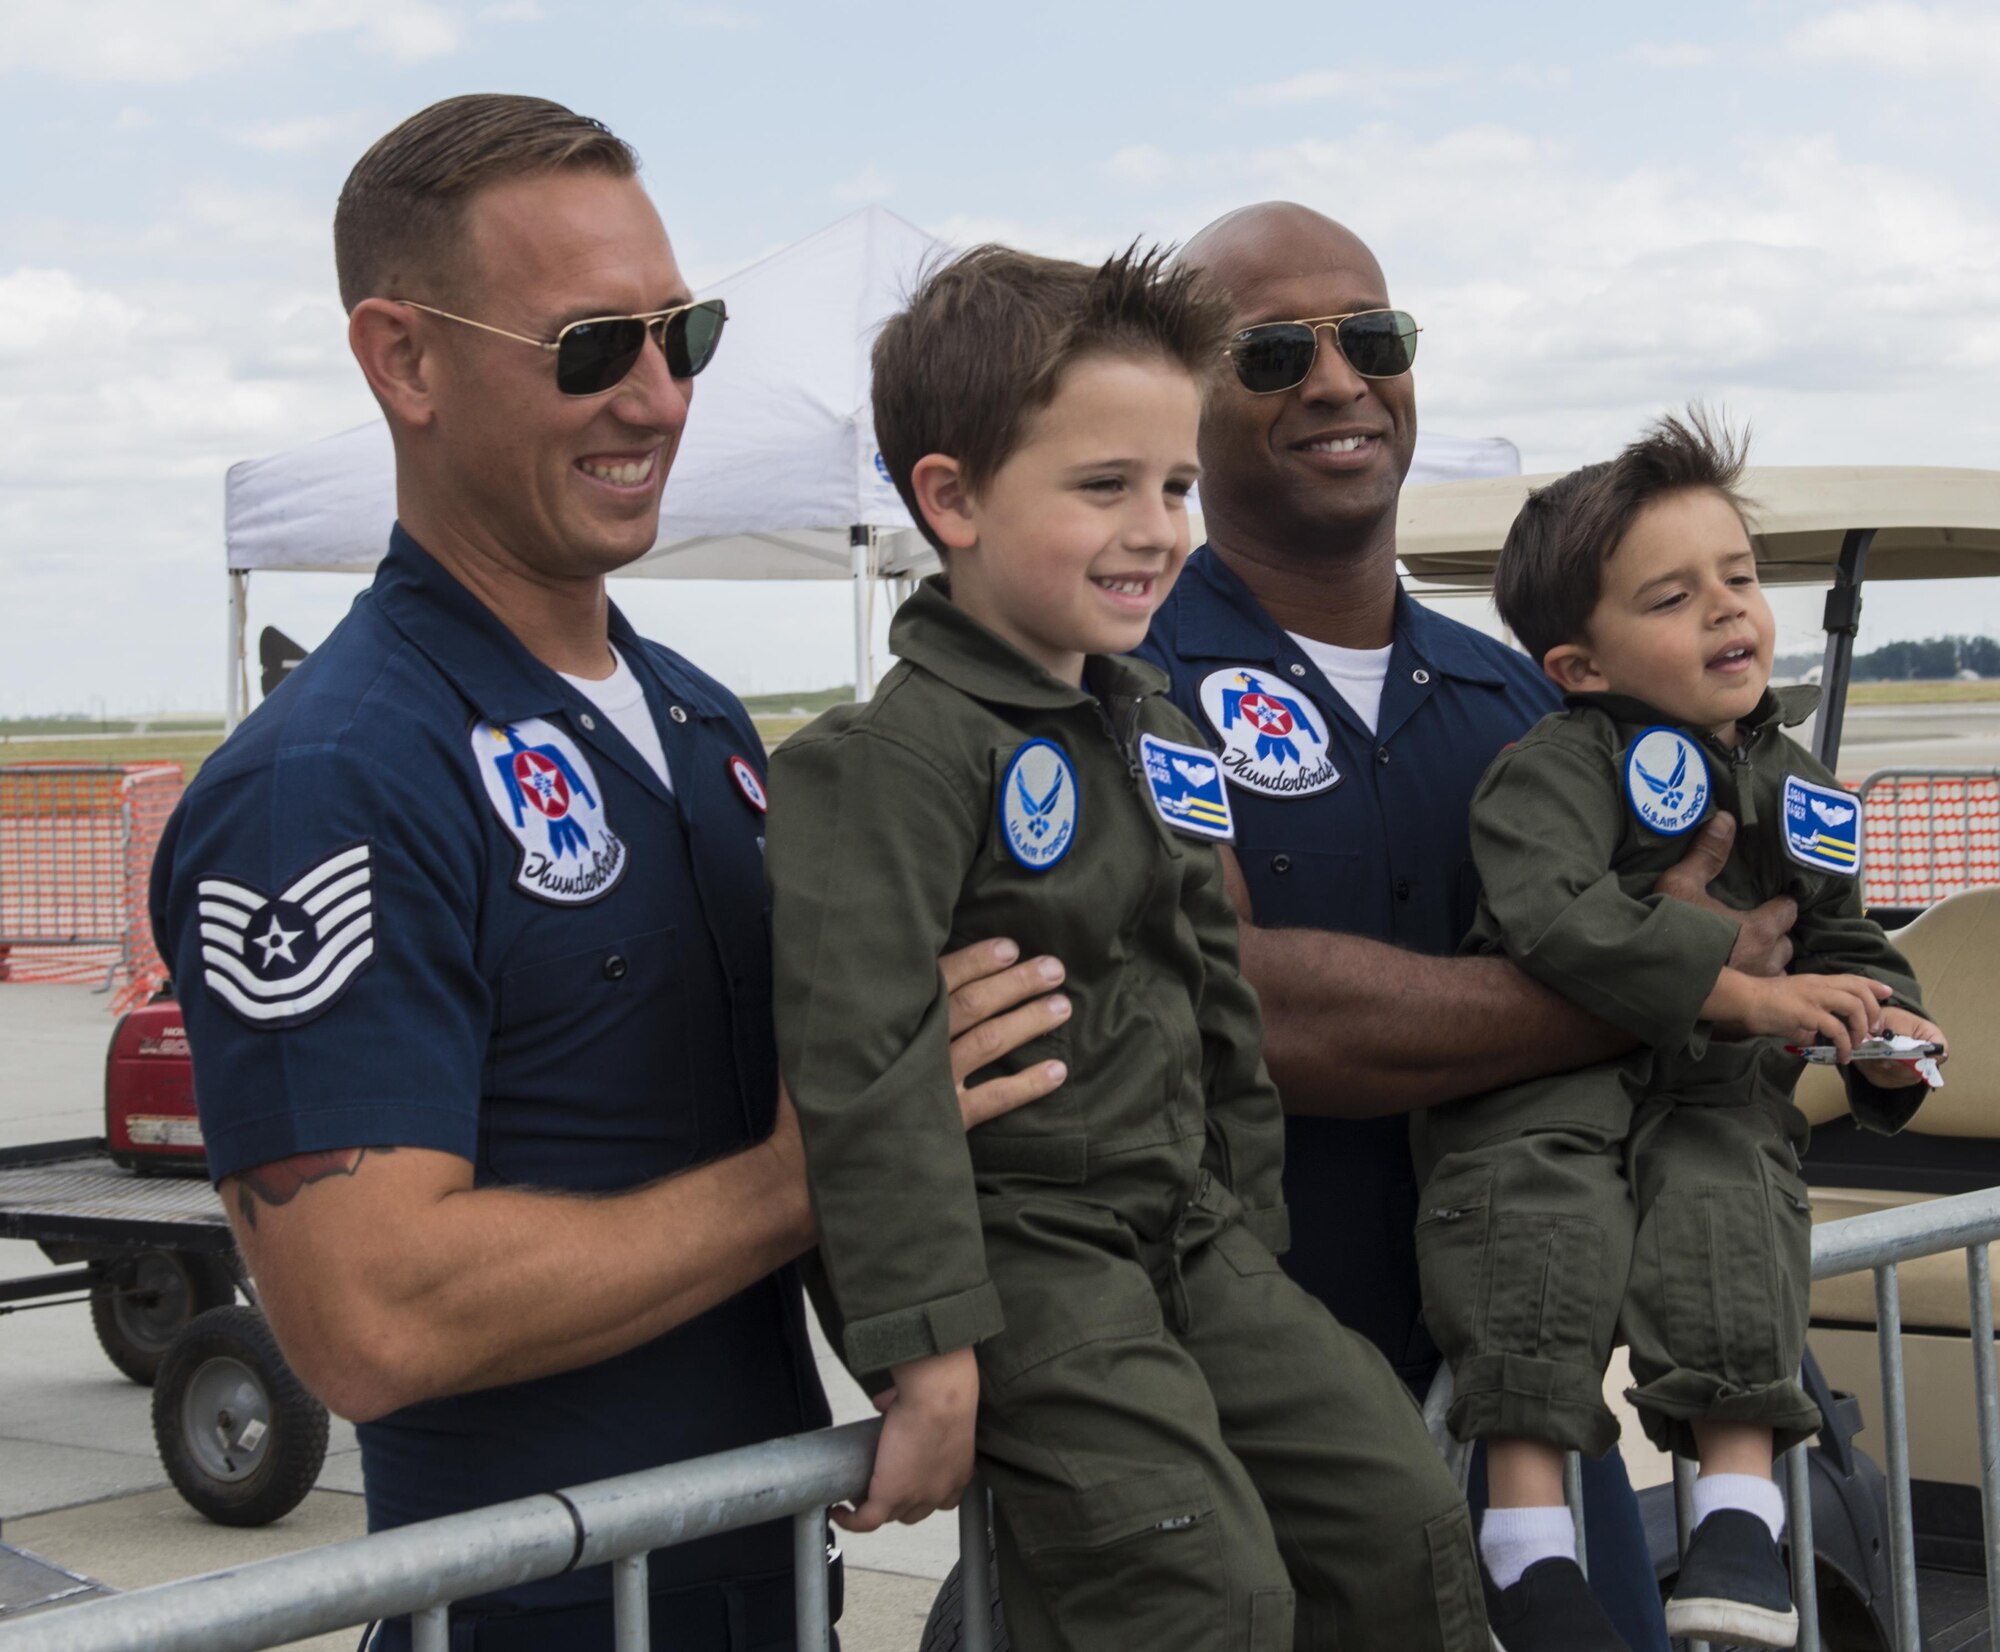 Members of the U.S. Air Force Thunderbirds pose for photos with children during the Wings Over Solano Air Show at Travis Air Force Base, Calif., May 6, 2017. The two-day event featured performances by the Thunderbirds, U.S. Army Golden Knights parachute team, flyovers and static displays. (U.S. Air Force photo by Heide Couch)